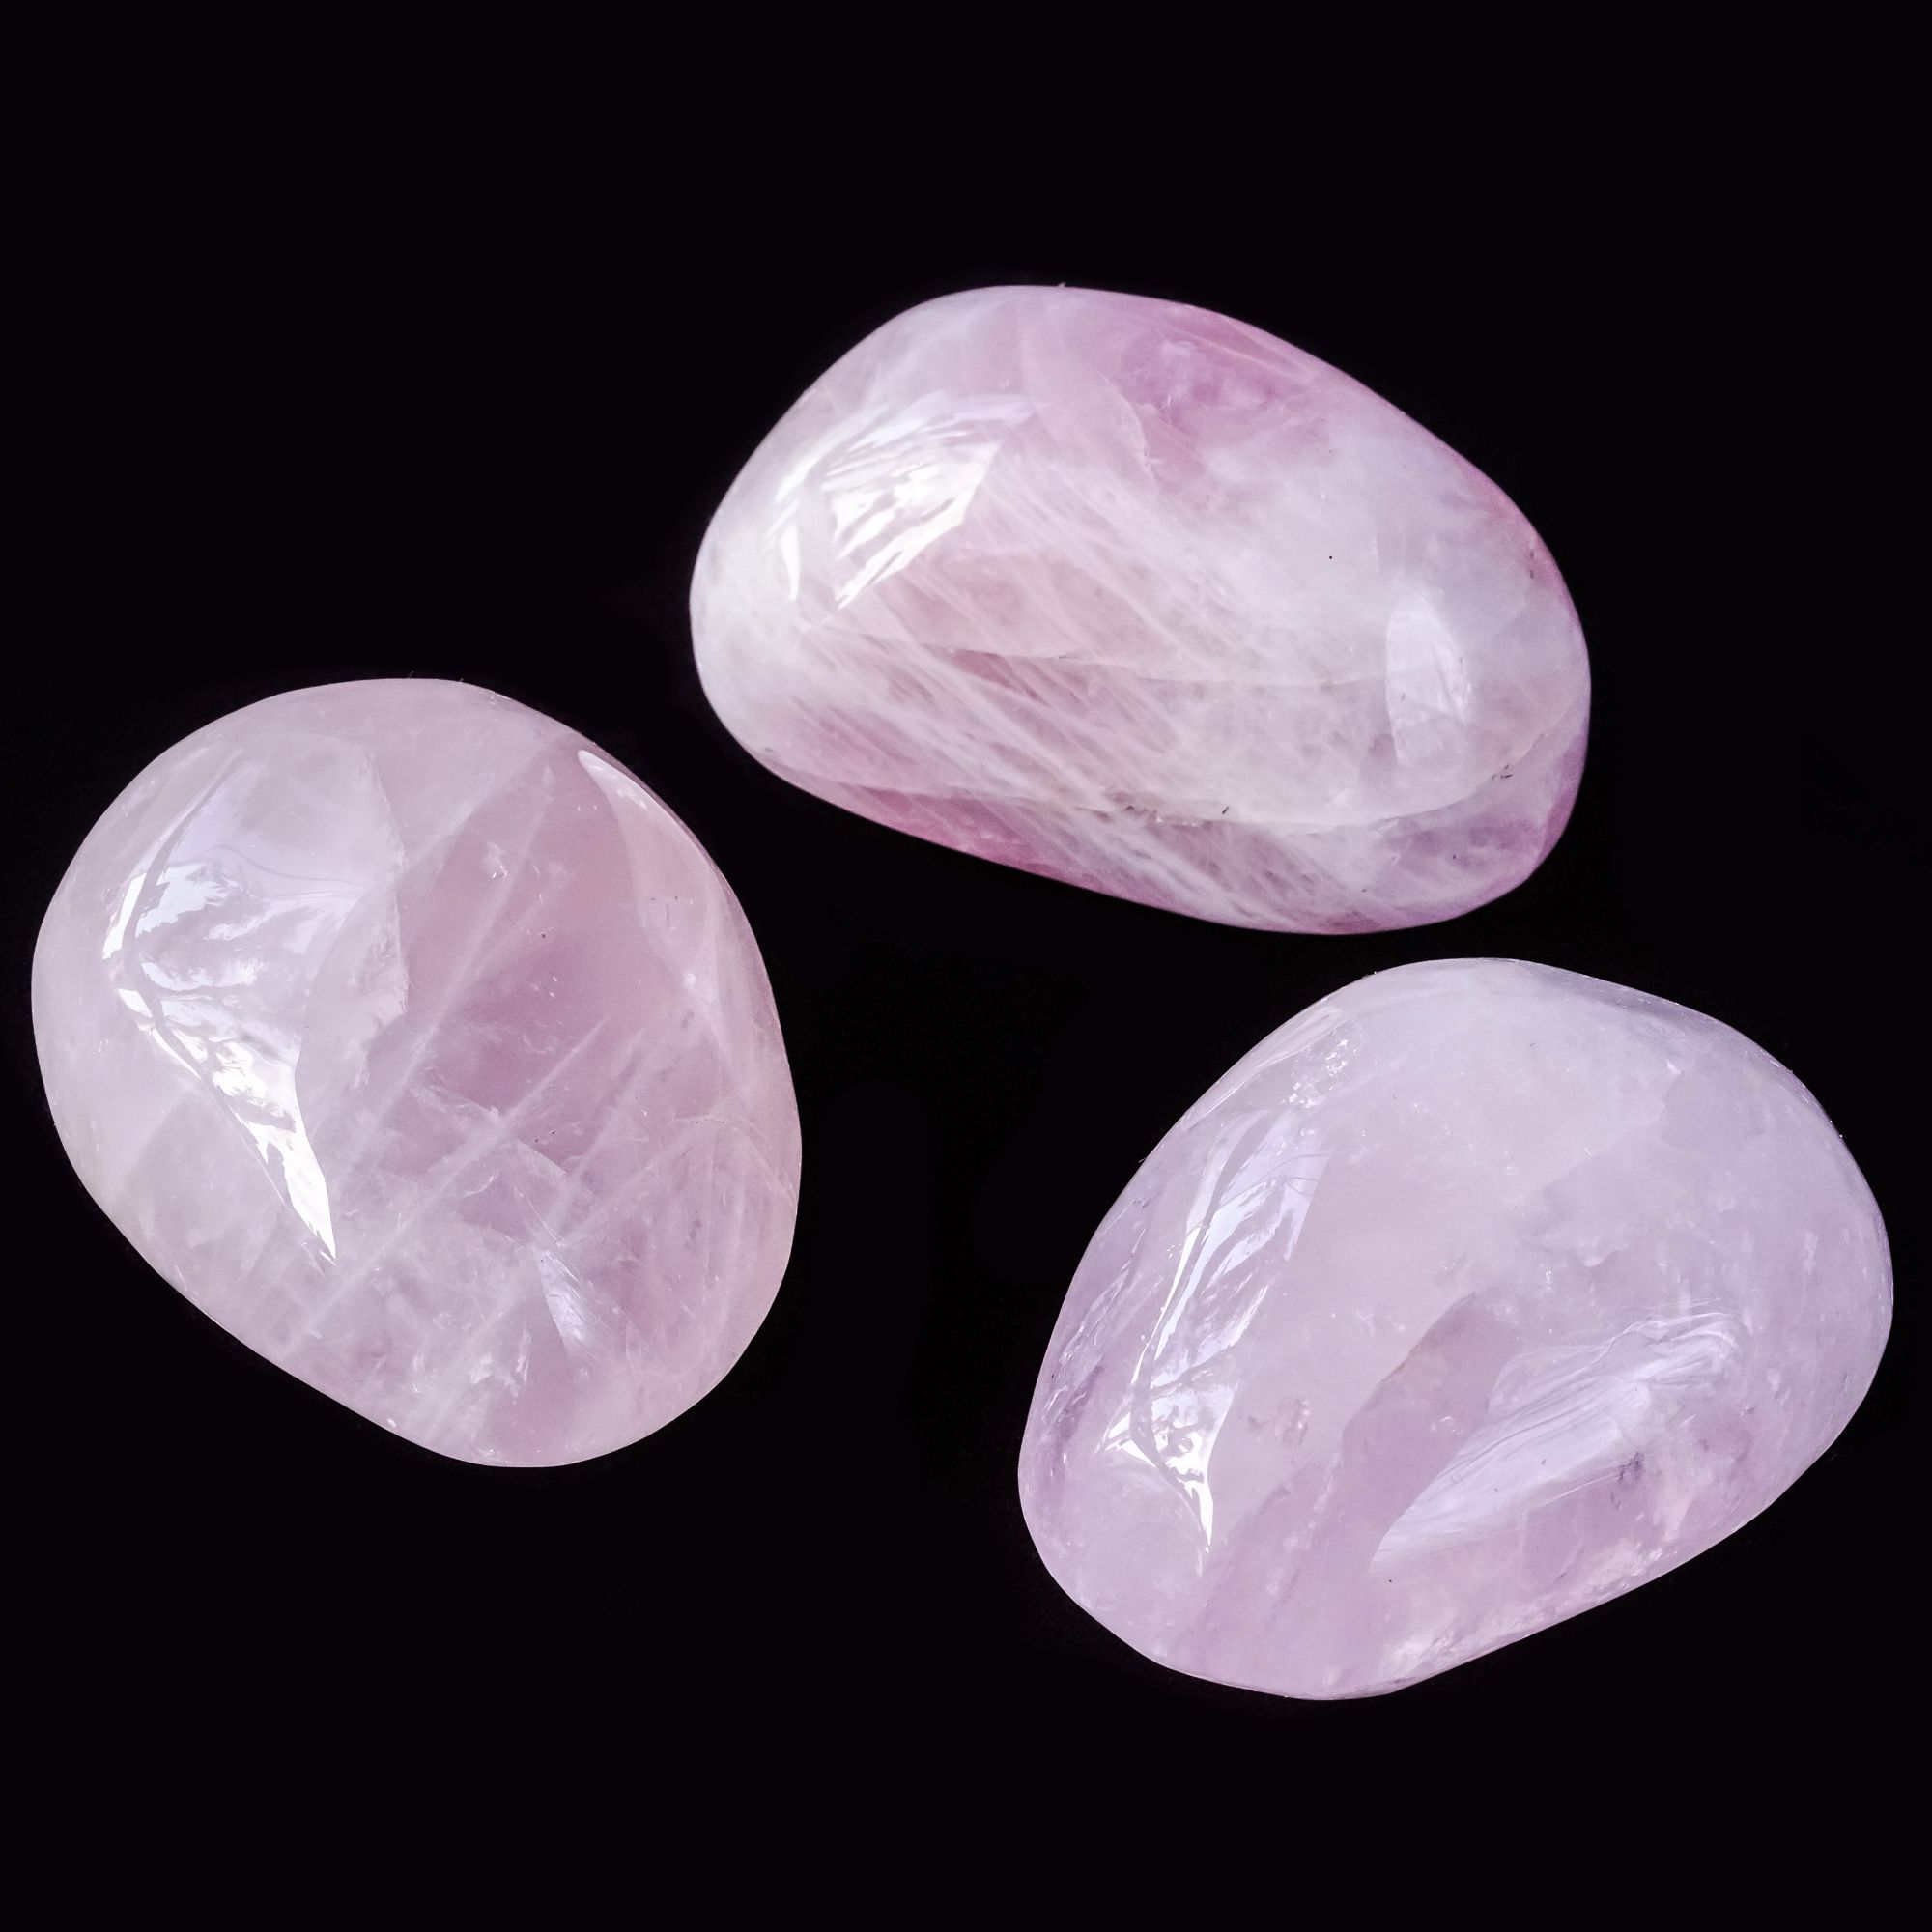 Rose Quartz Power Stone to amplify the Universal love force